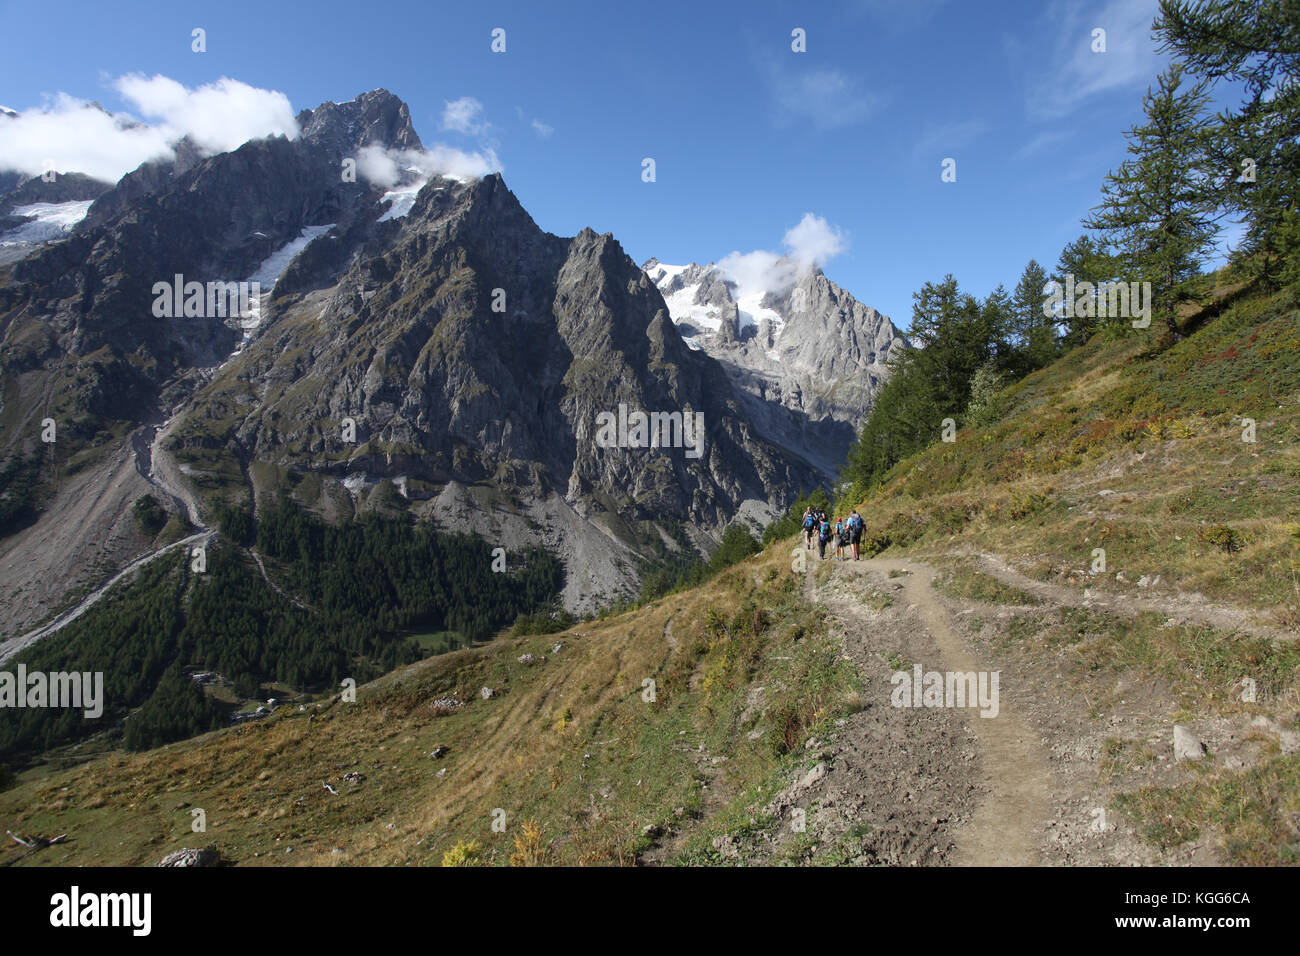 beautiful panoramic view of the alps around the Mont Blanc mountain range in Europe. Tour the Mont Blanc hiking around glaciers, forests and streams Stock Photo